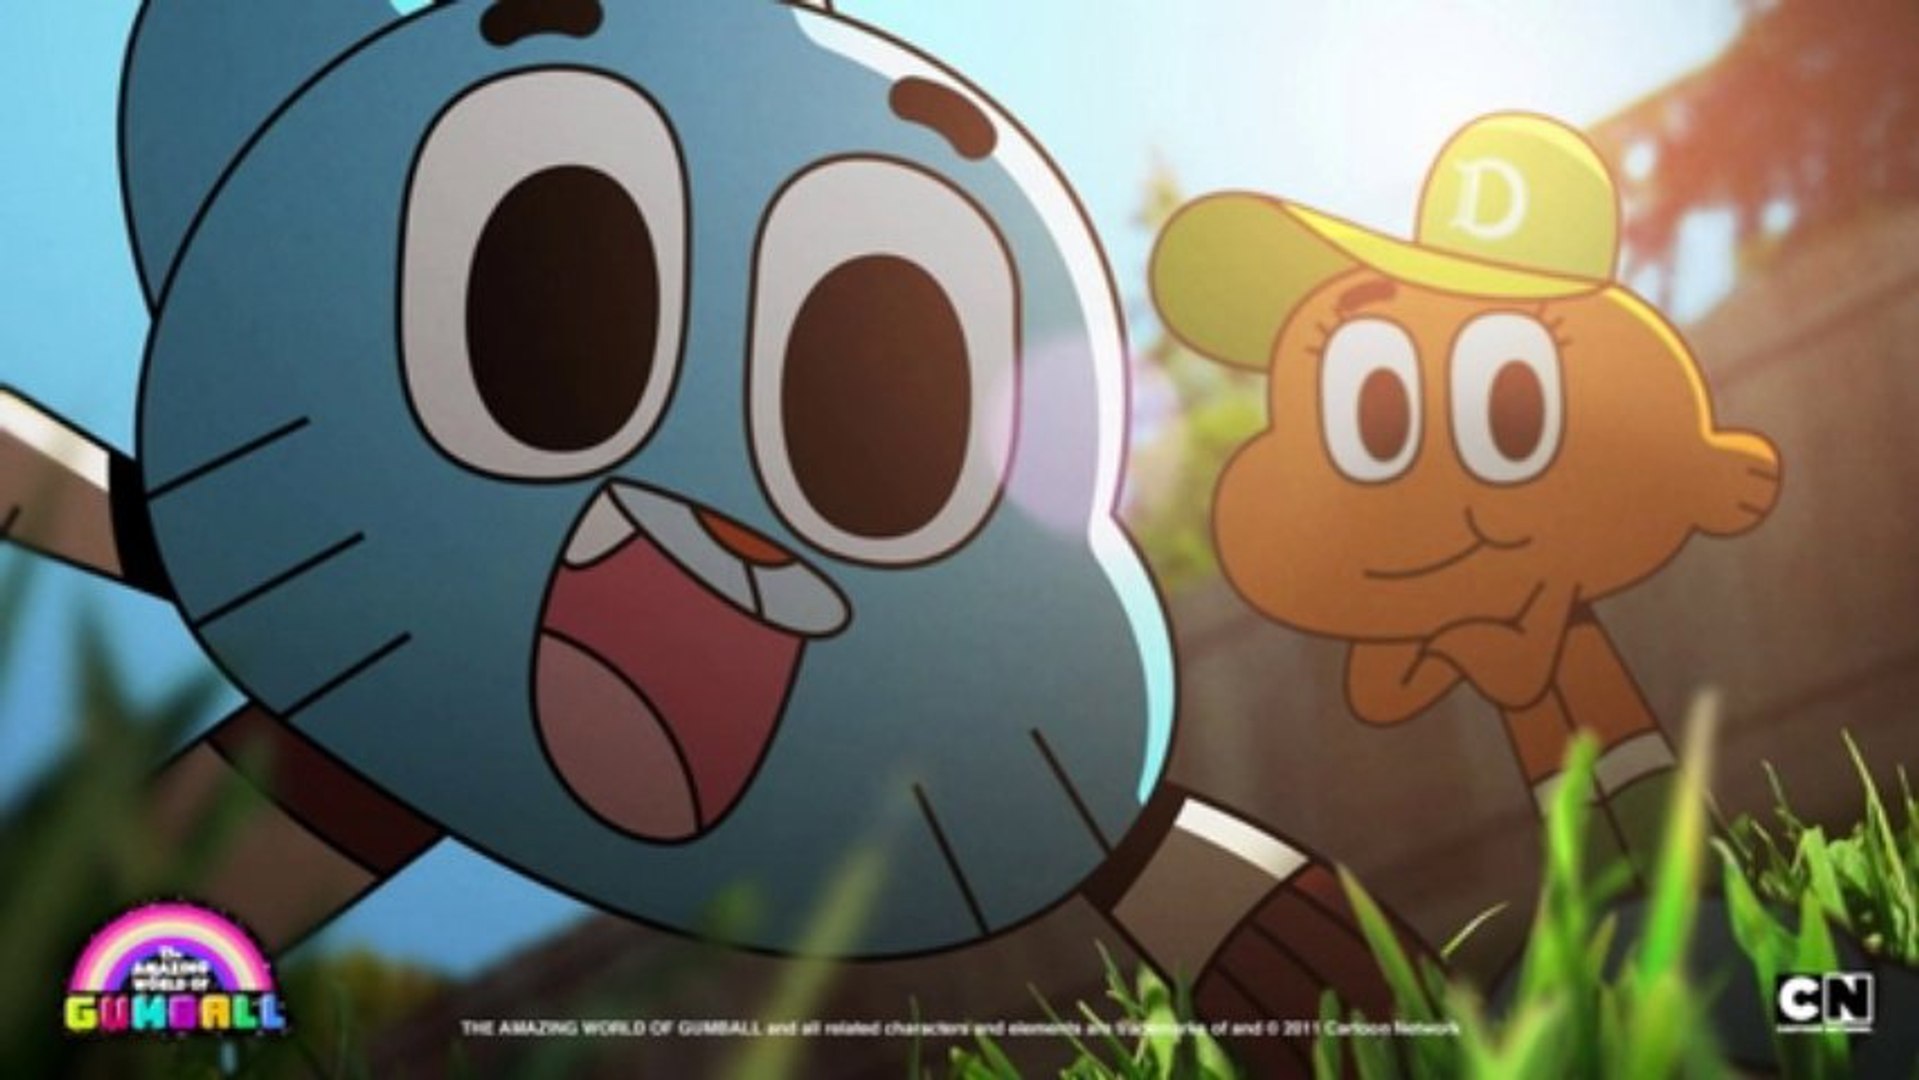 The Grieving. (FULL LOST EPISODE) The Amazing World of Gumball